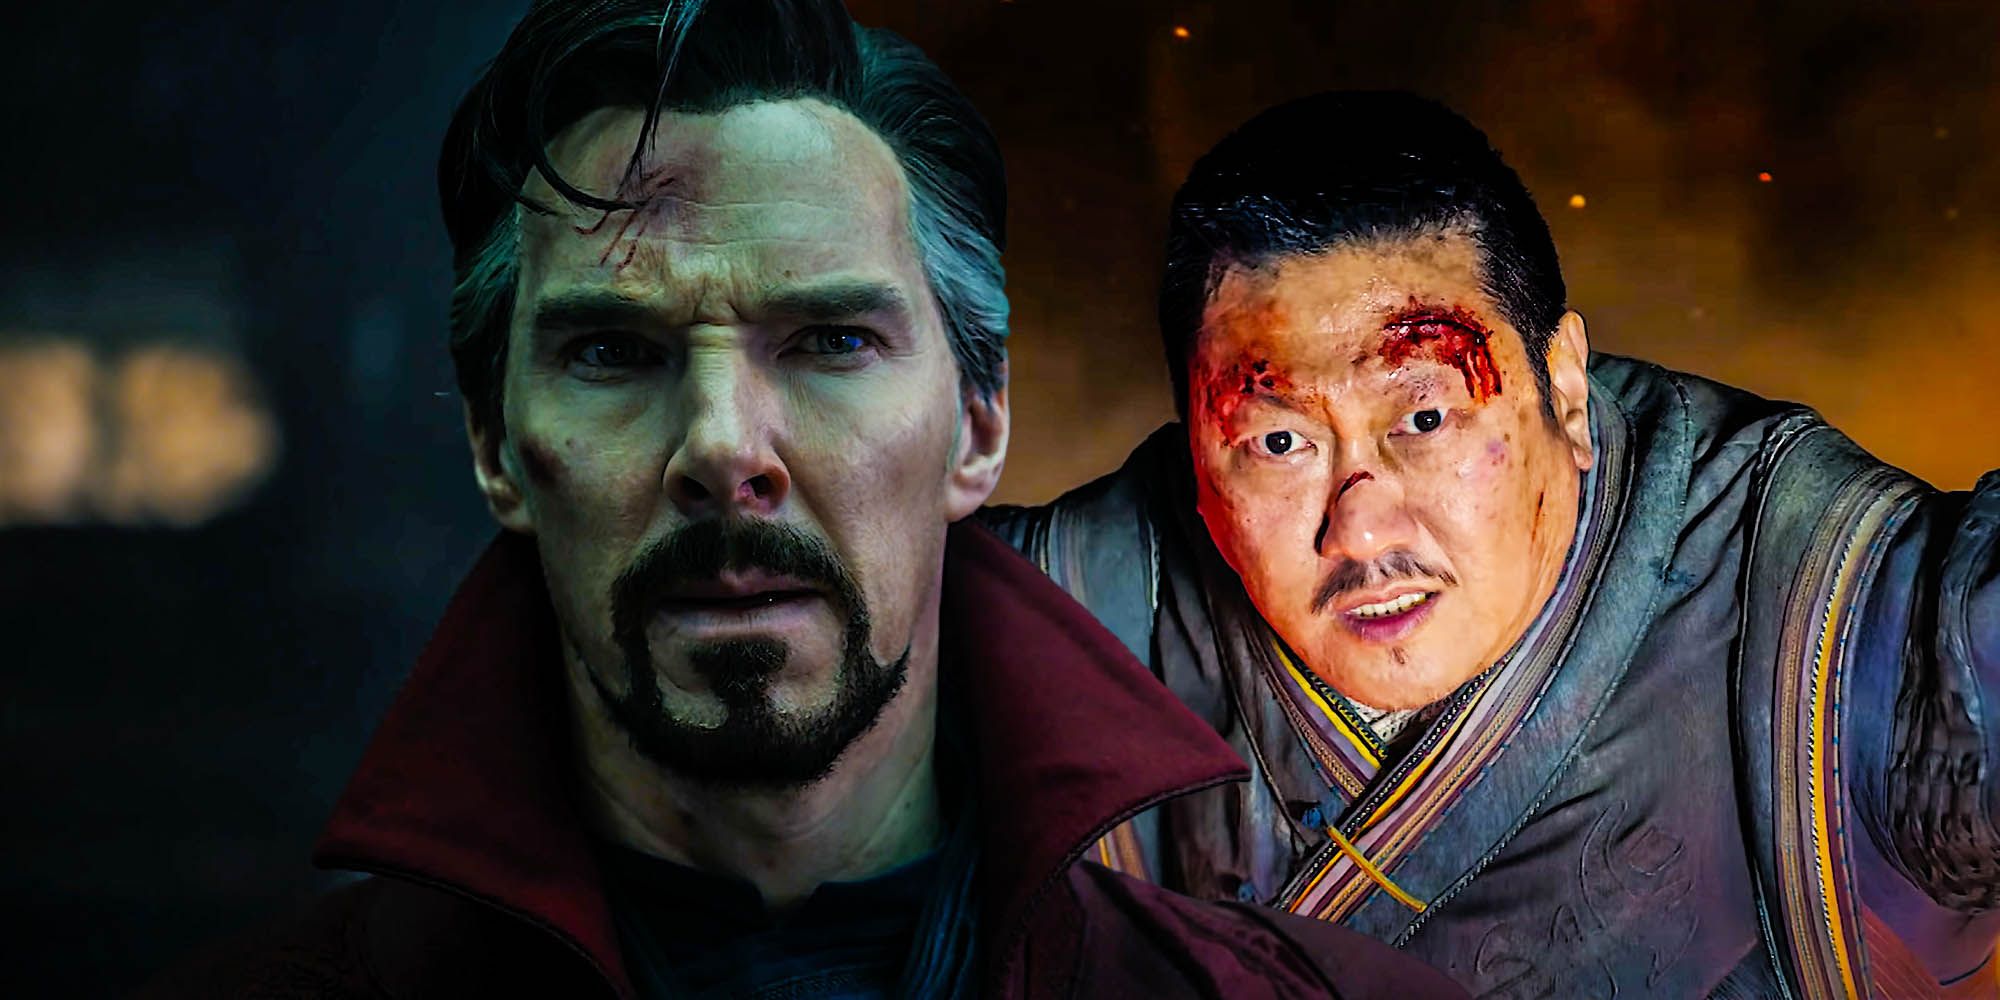 Doctor strange in the multiverse of madness setting up the worst MCU death Wong